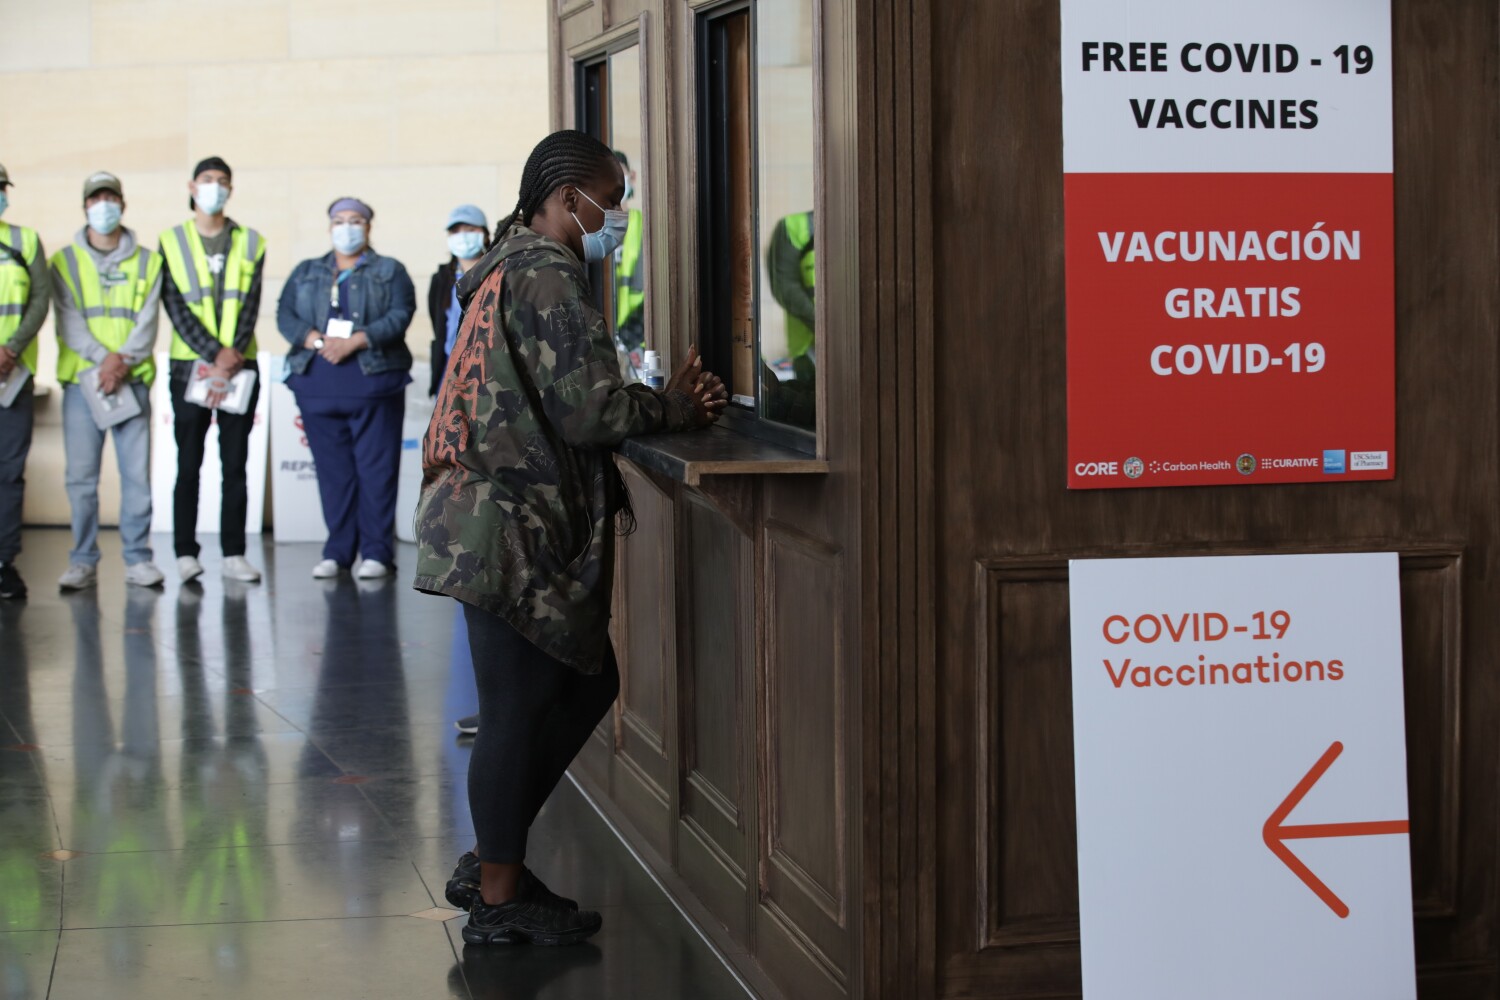 COVID-19 vaccination site opens at Union Station as state hurtles toward reopening 